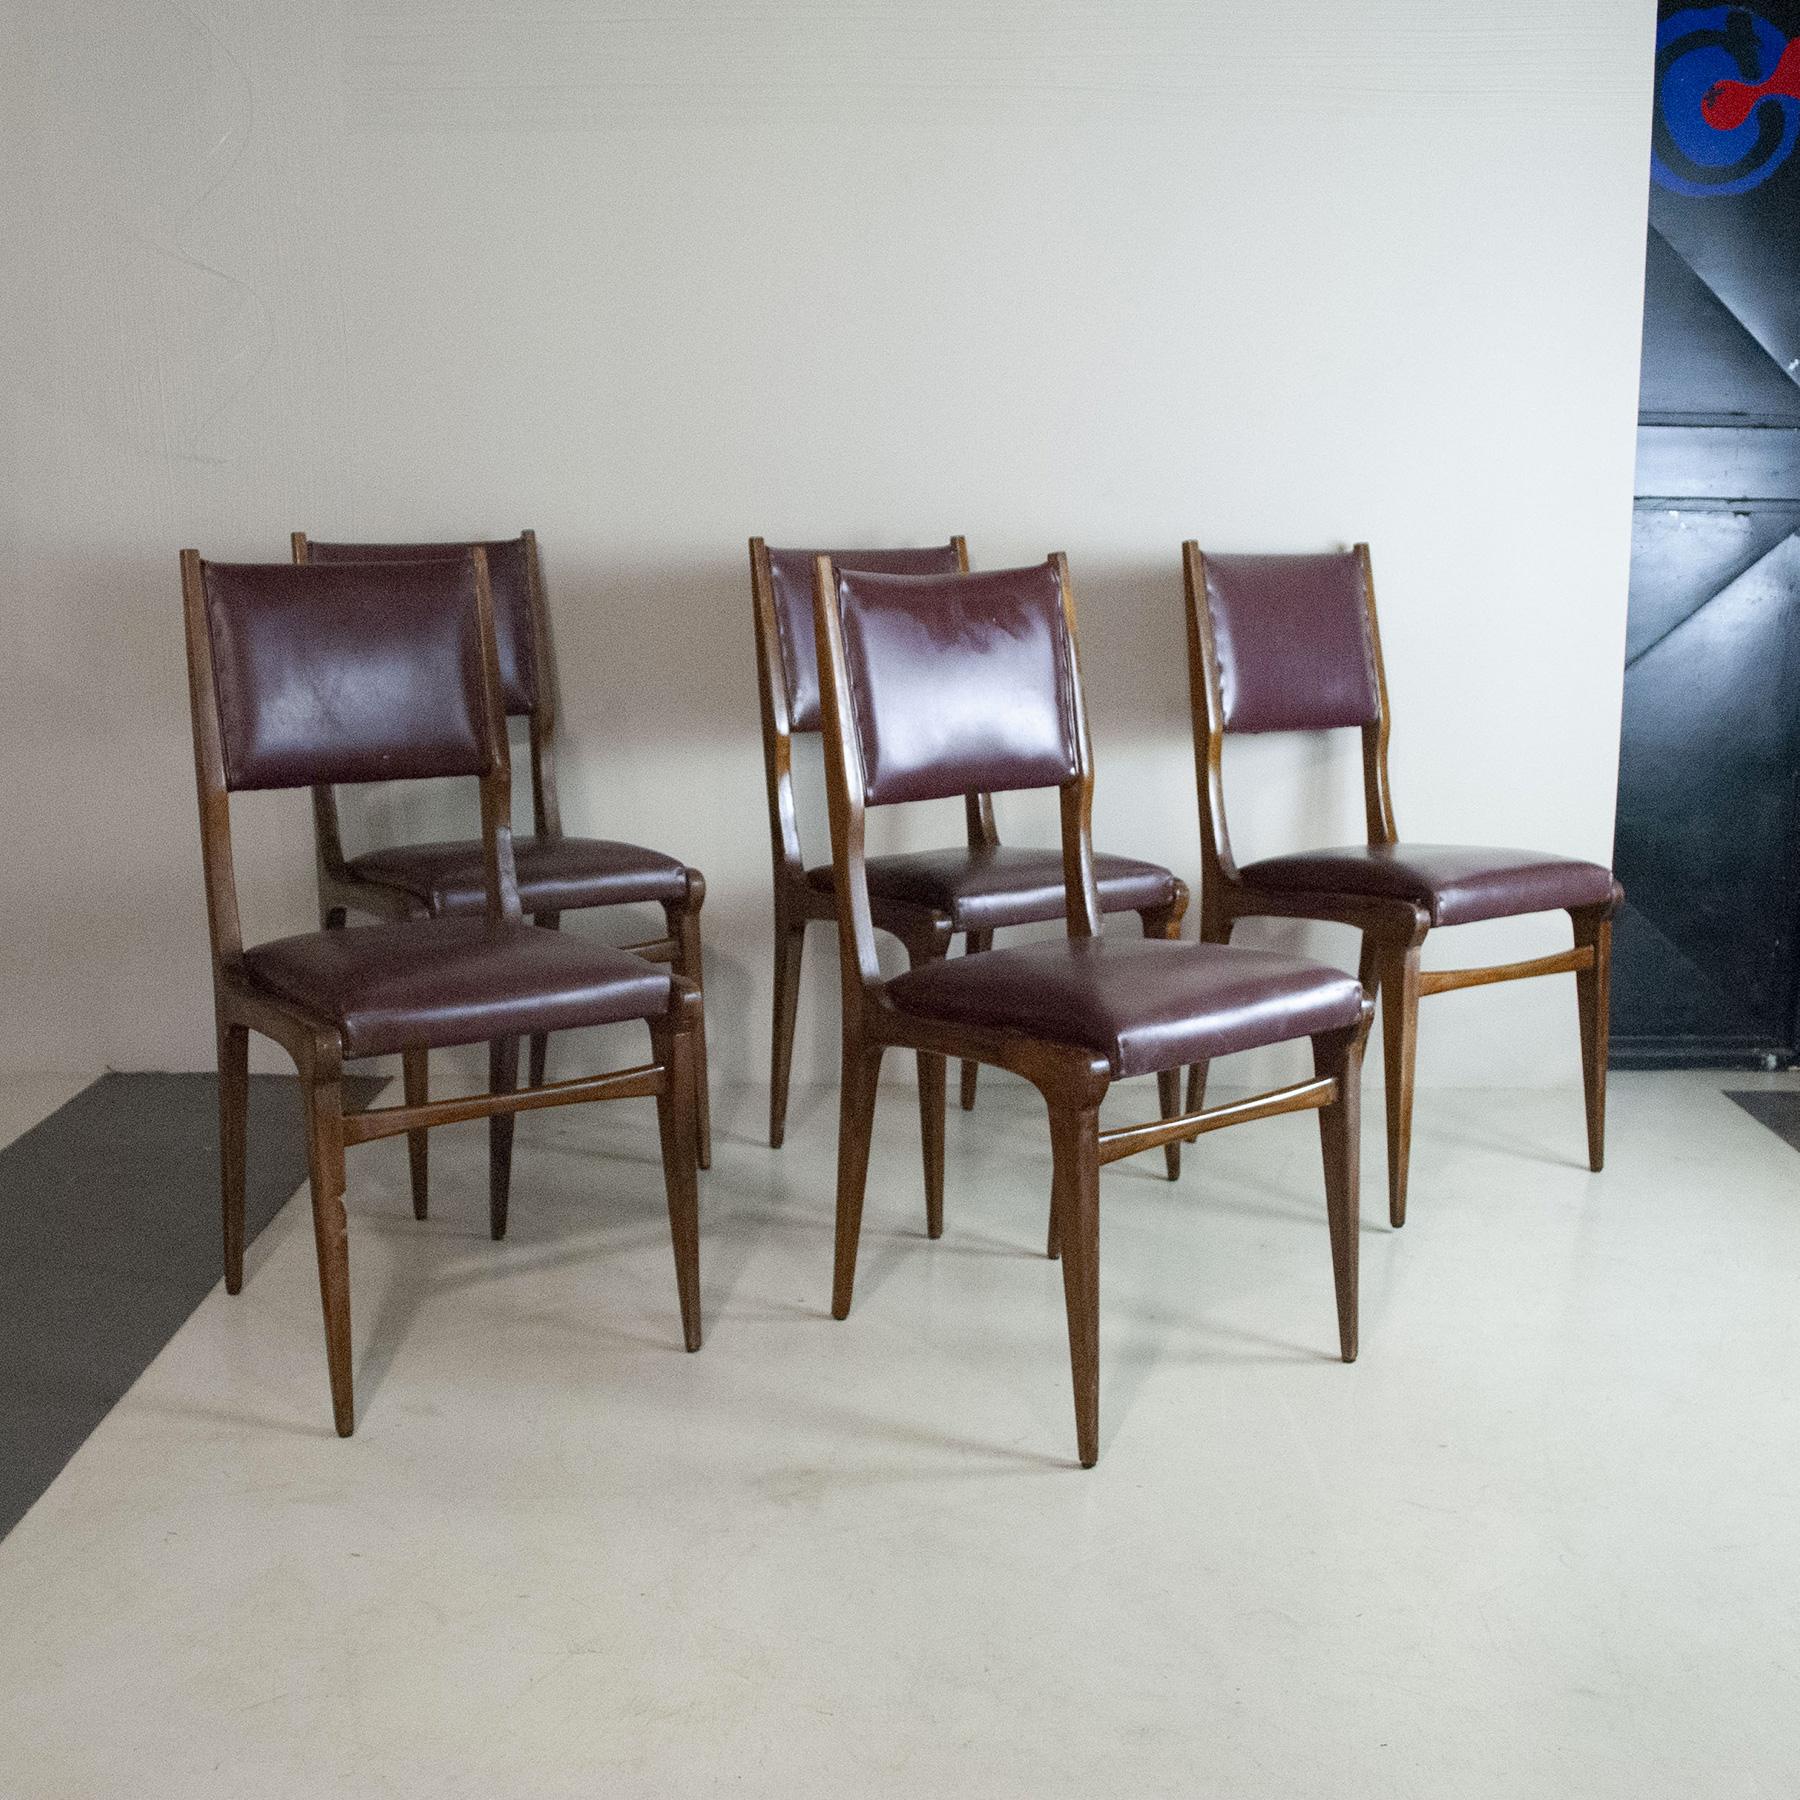 Carlo de Carli in the Style Italian Midcentury Chairs For Sale 8